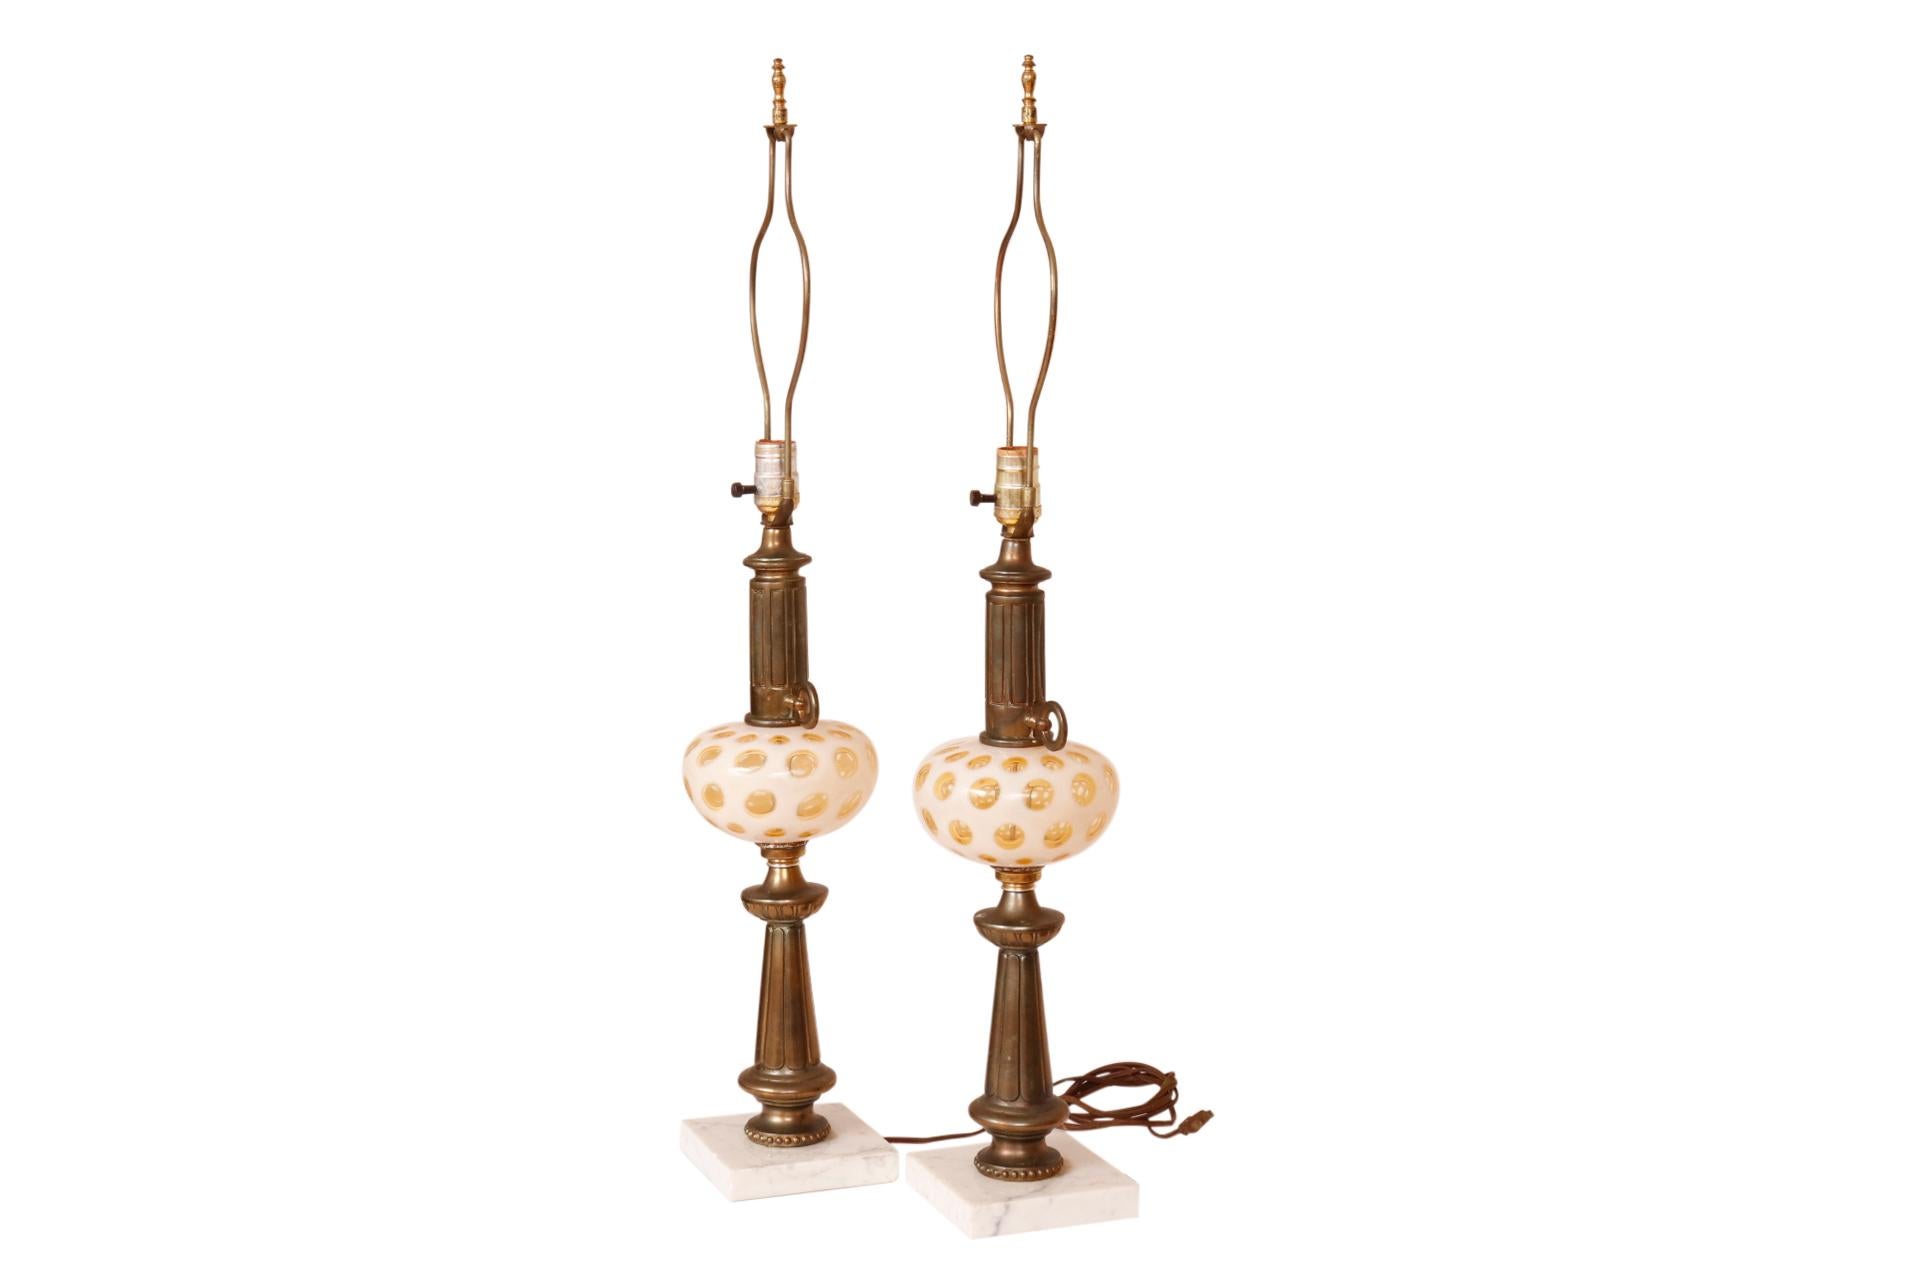 A pair of mid century brass and glass table lamps. Central brass columns are reeded with blown glass vases at the center. The glass vases are milk glass with clear yellow bubbles blown from within. Lamps stand on square marble bases. One lamp has a